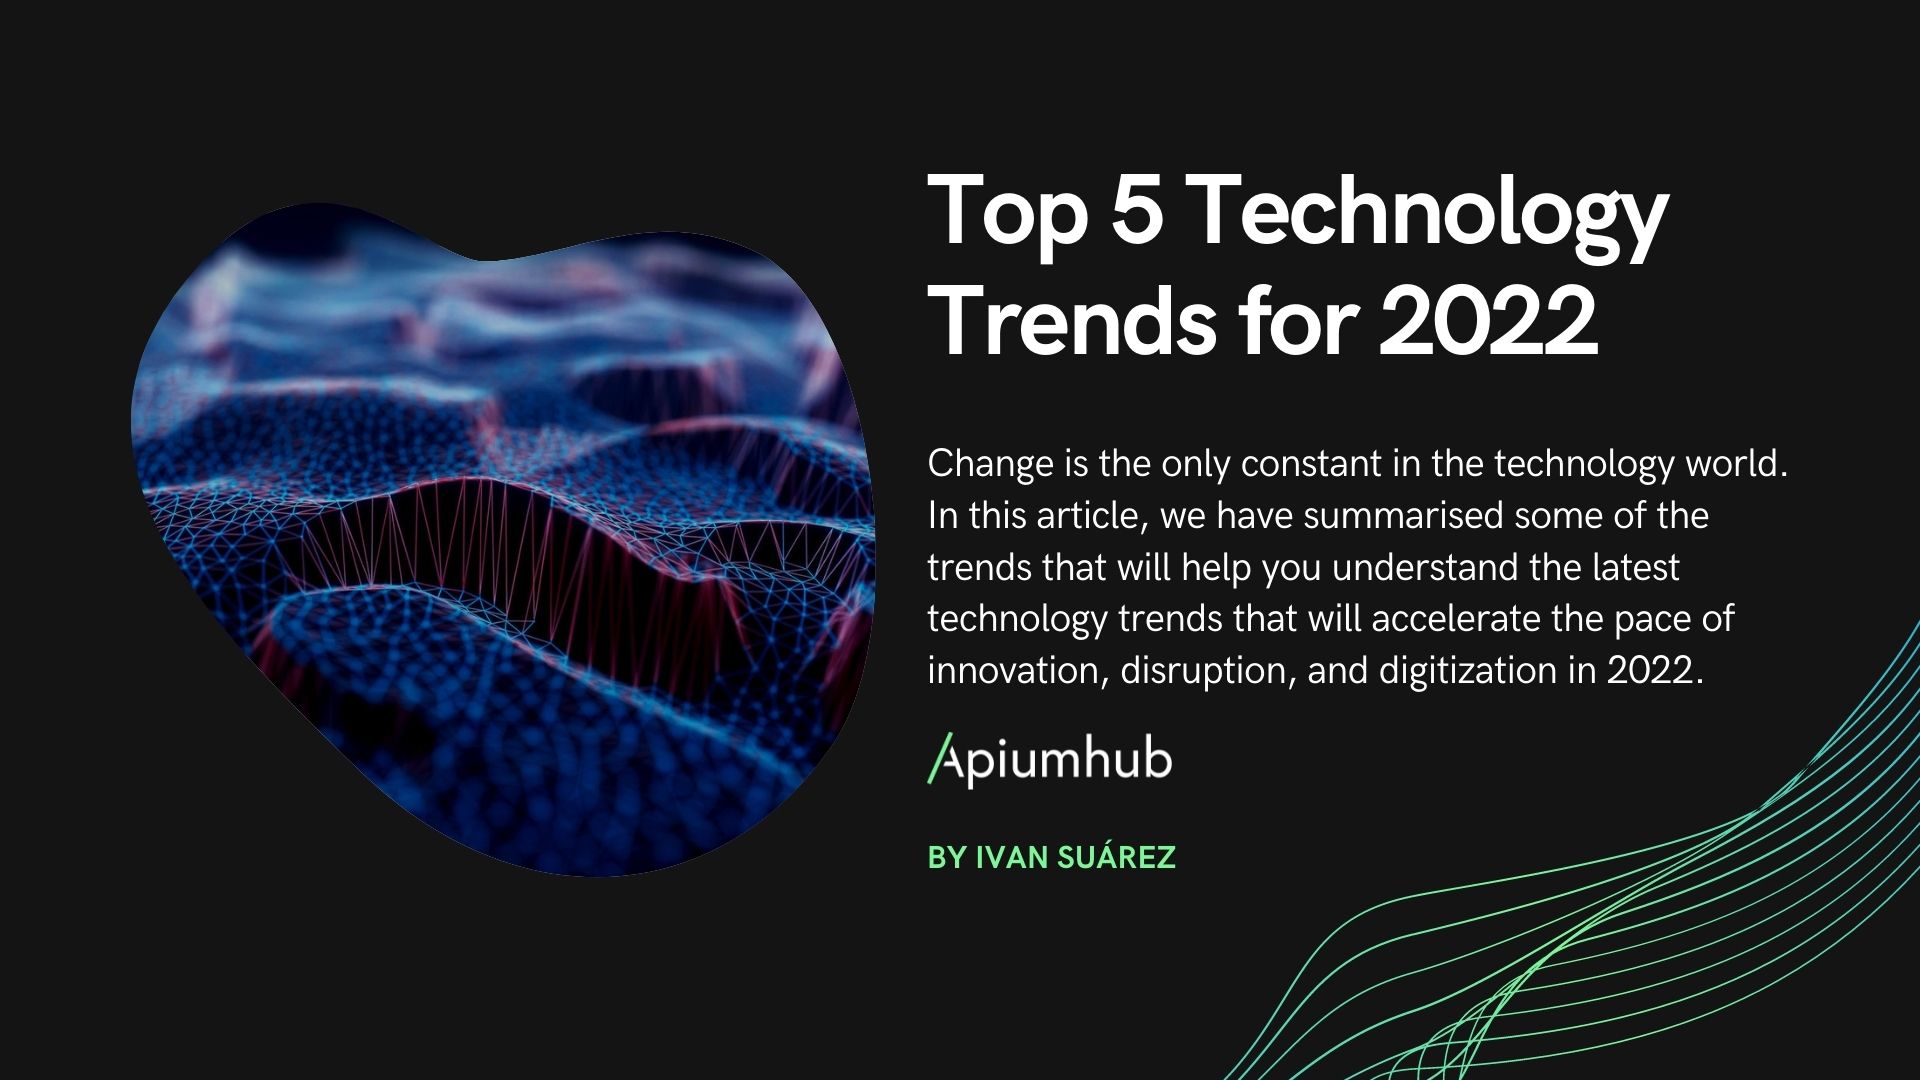 Top 5 Technology Trends for 2022